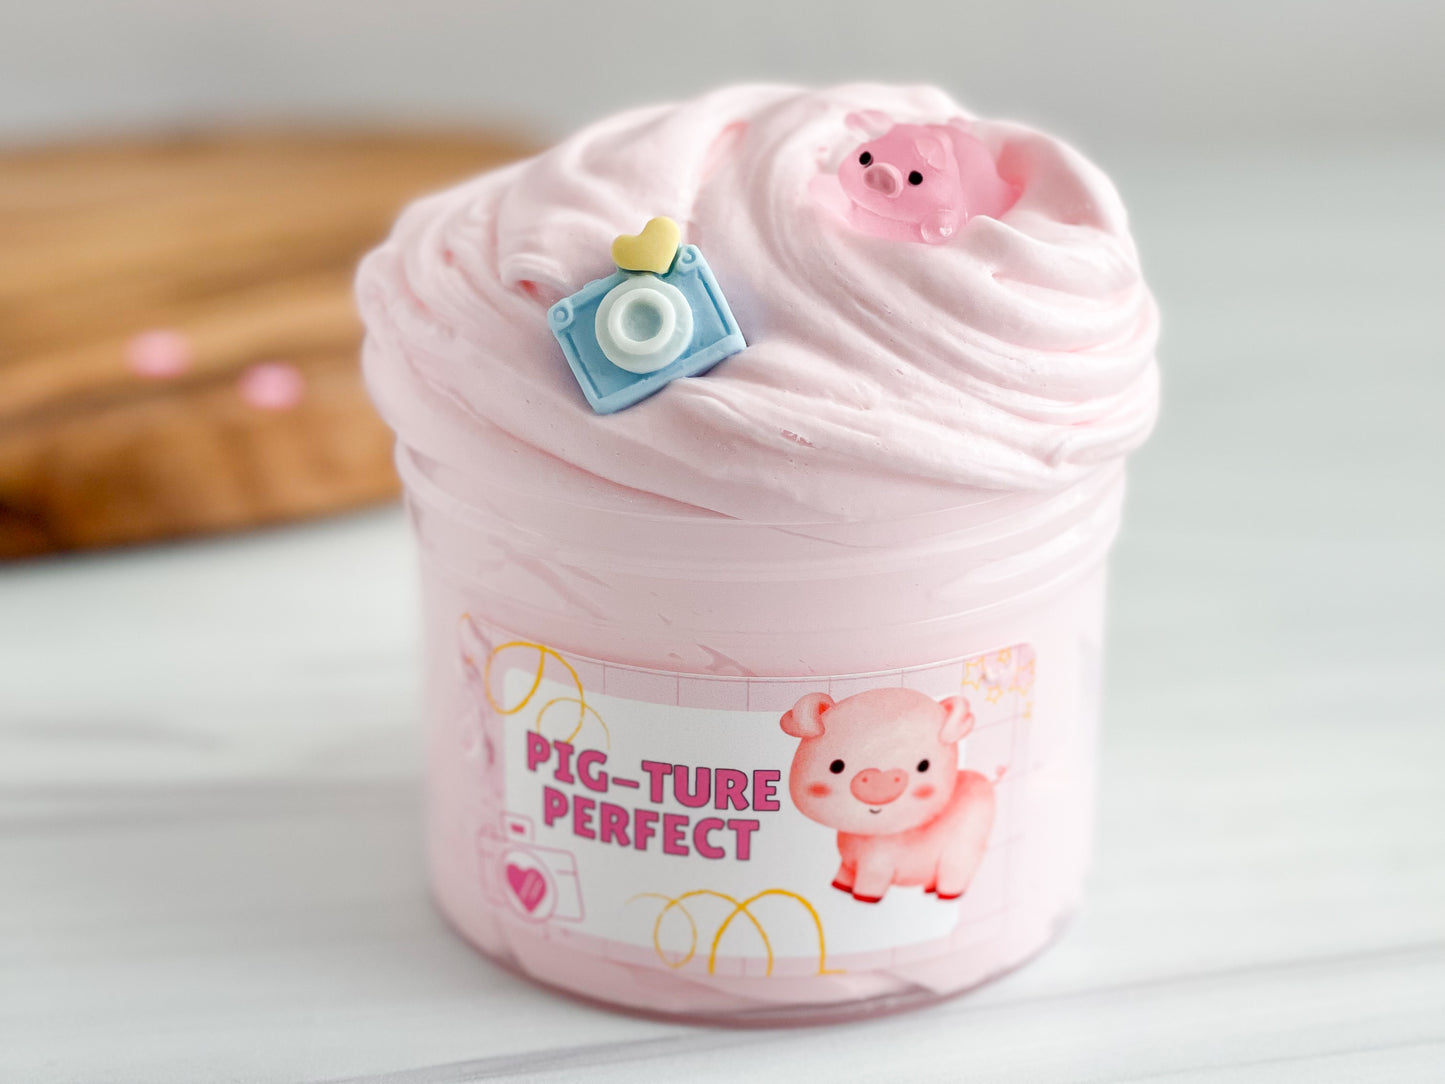 Pig-ture Perfect